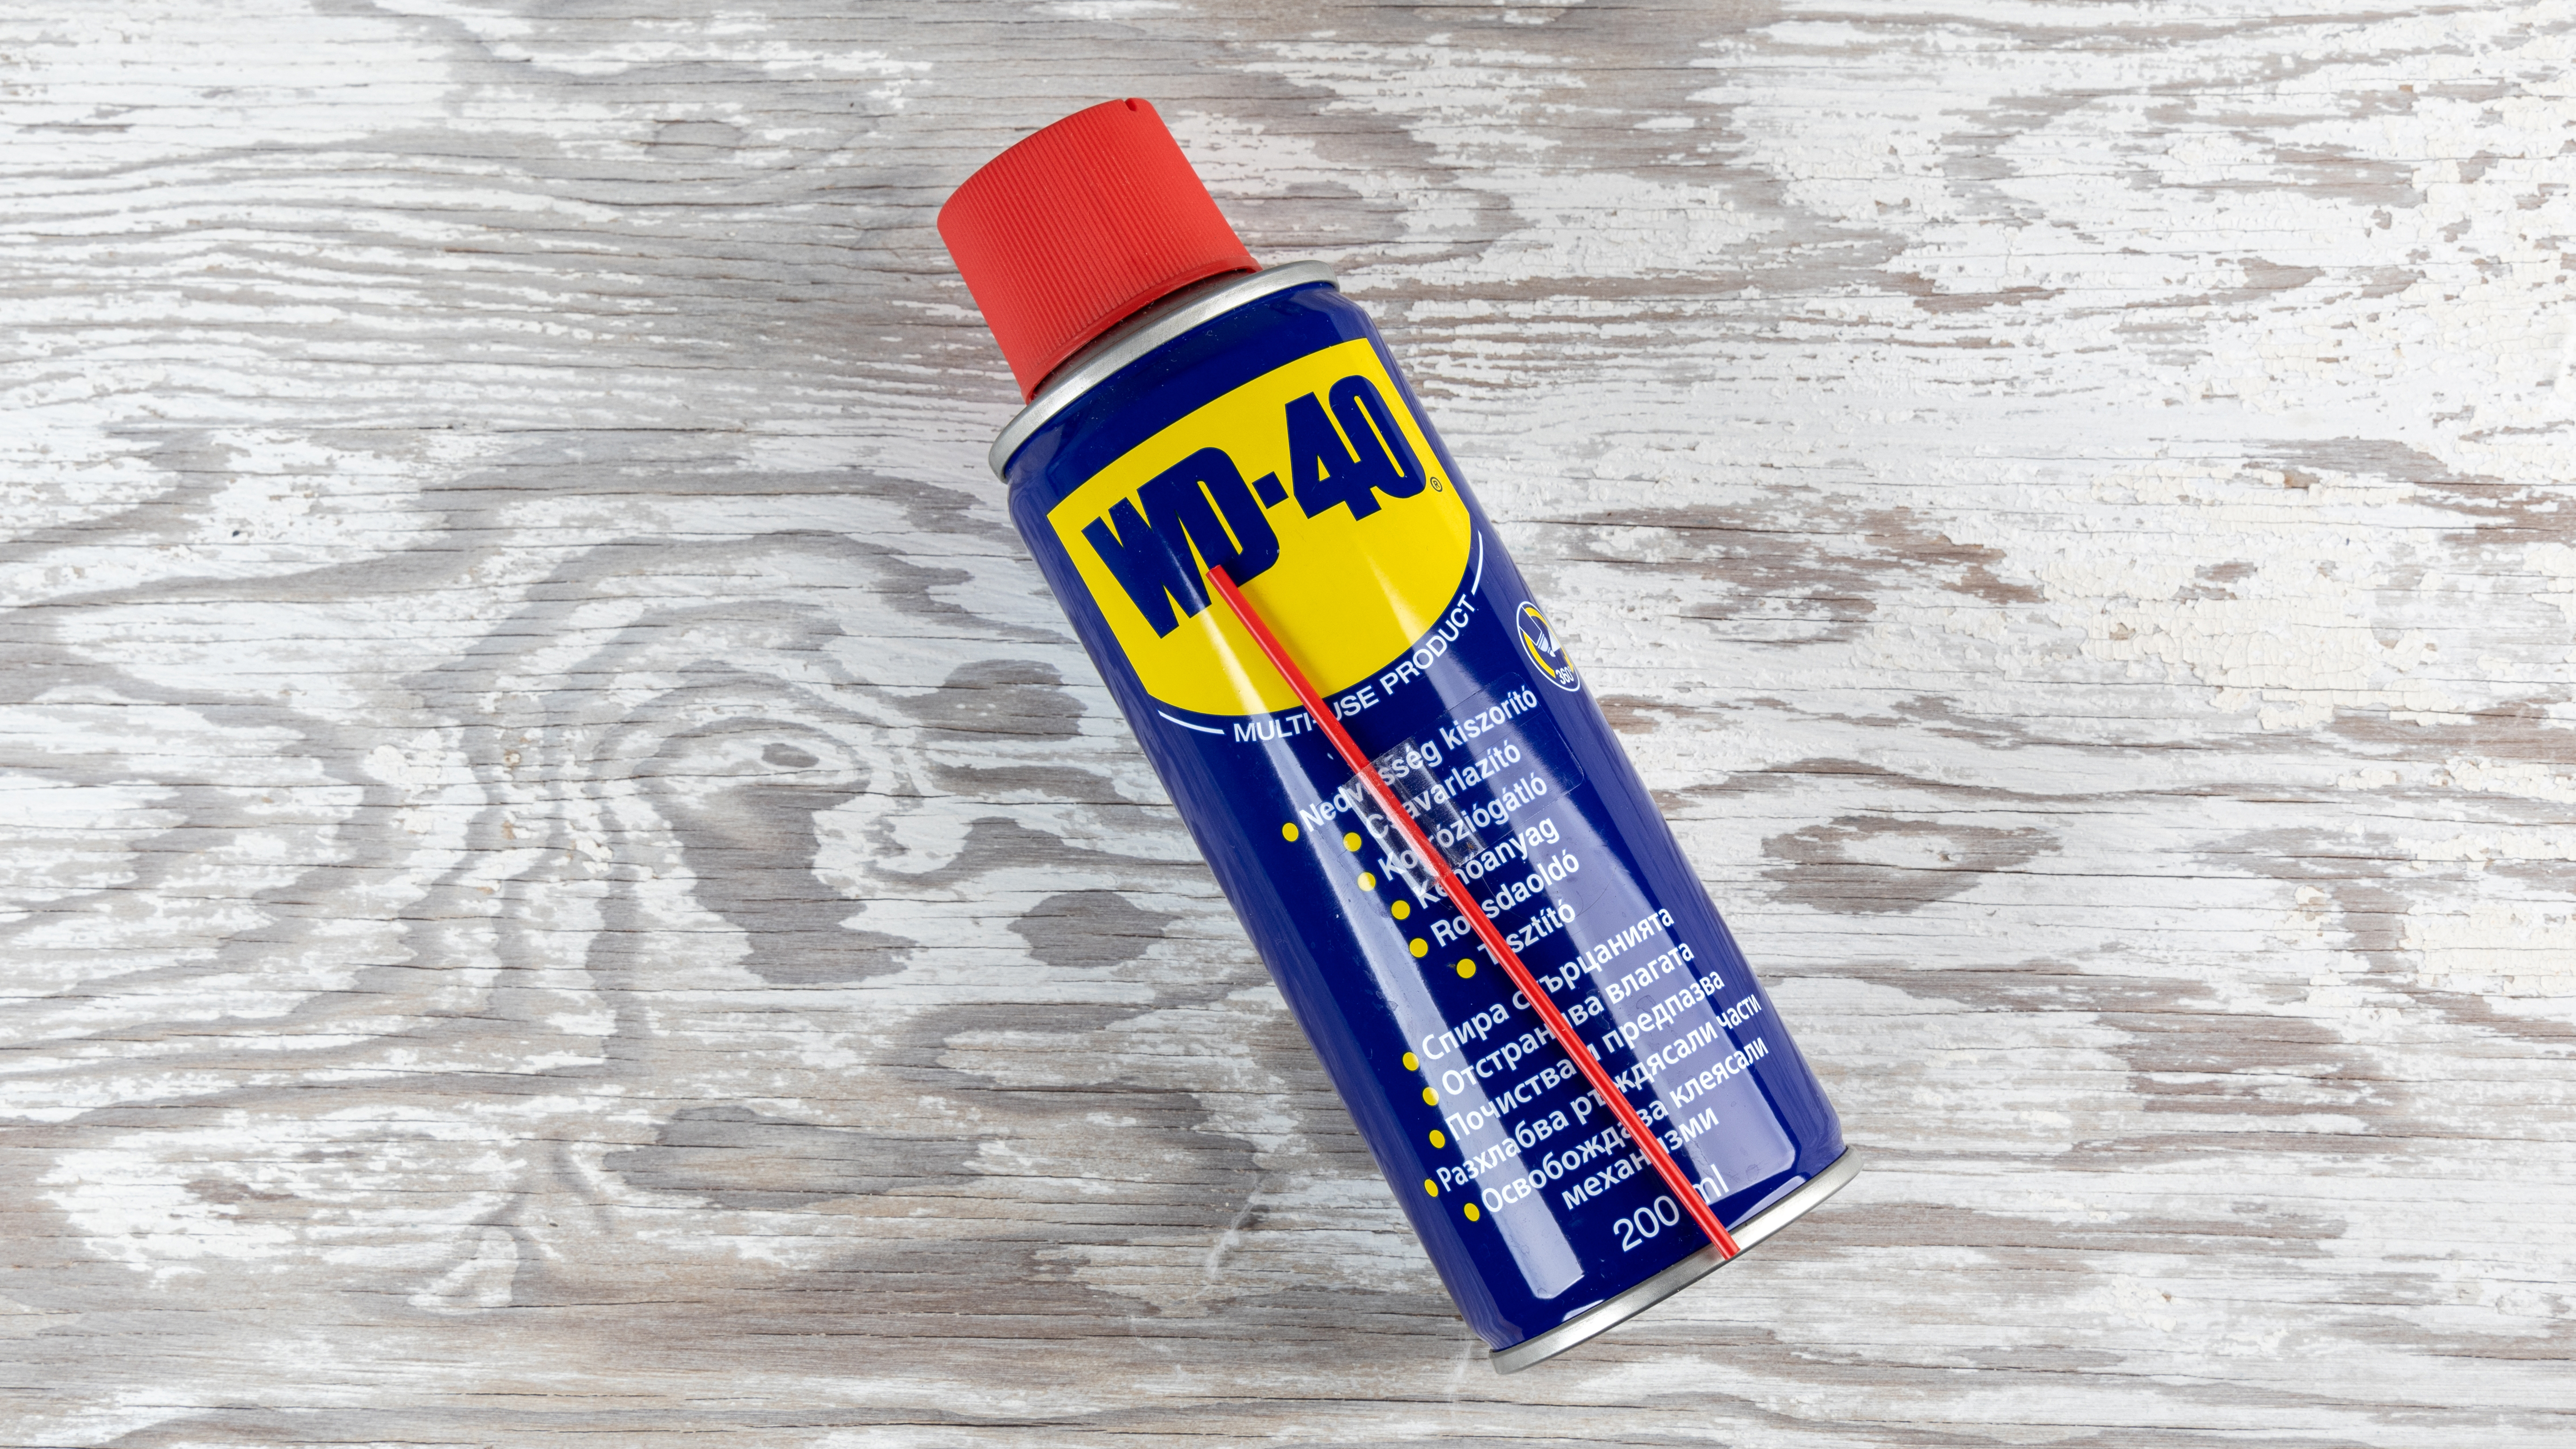 WD-40 Multi-Use Product 411g Can - Drives Out Moisture, inhibits Rust,  lubricates, removes Grease and Stickiness |1003 | Single Can : Amazon.ca:  Industrial & Scientific